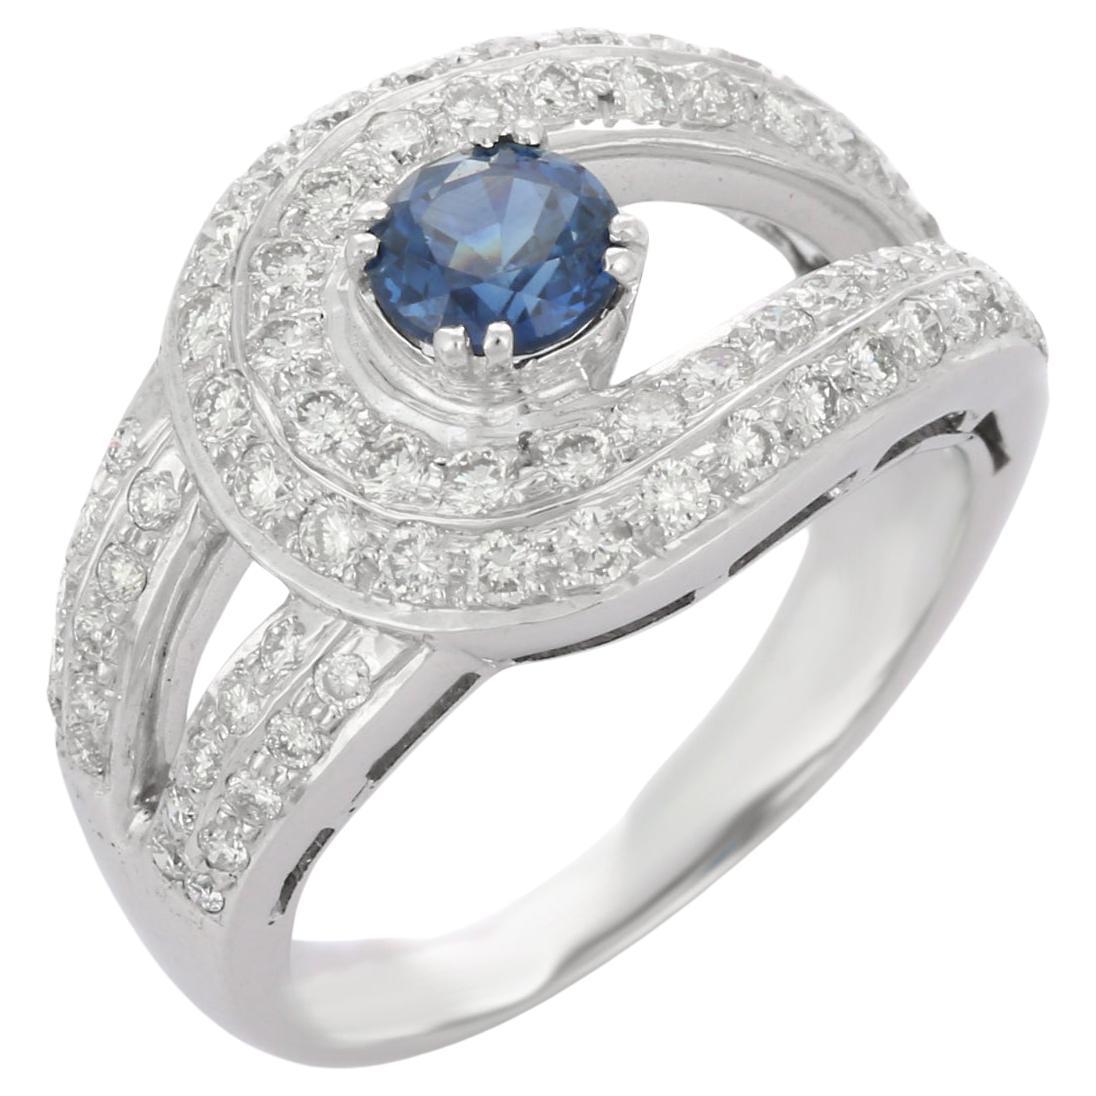 For Sale:  Blue Sapphire and Diamond Cocktail Ring in 18K White Gold